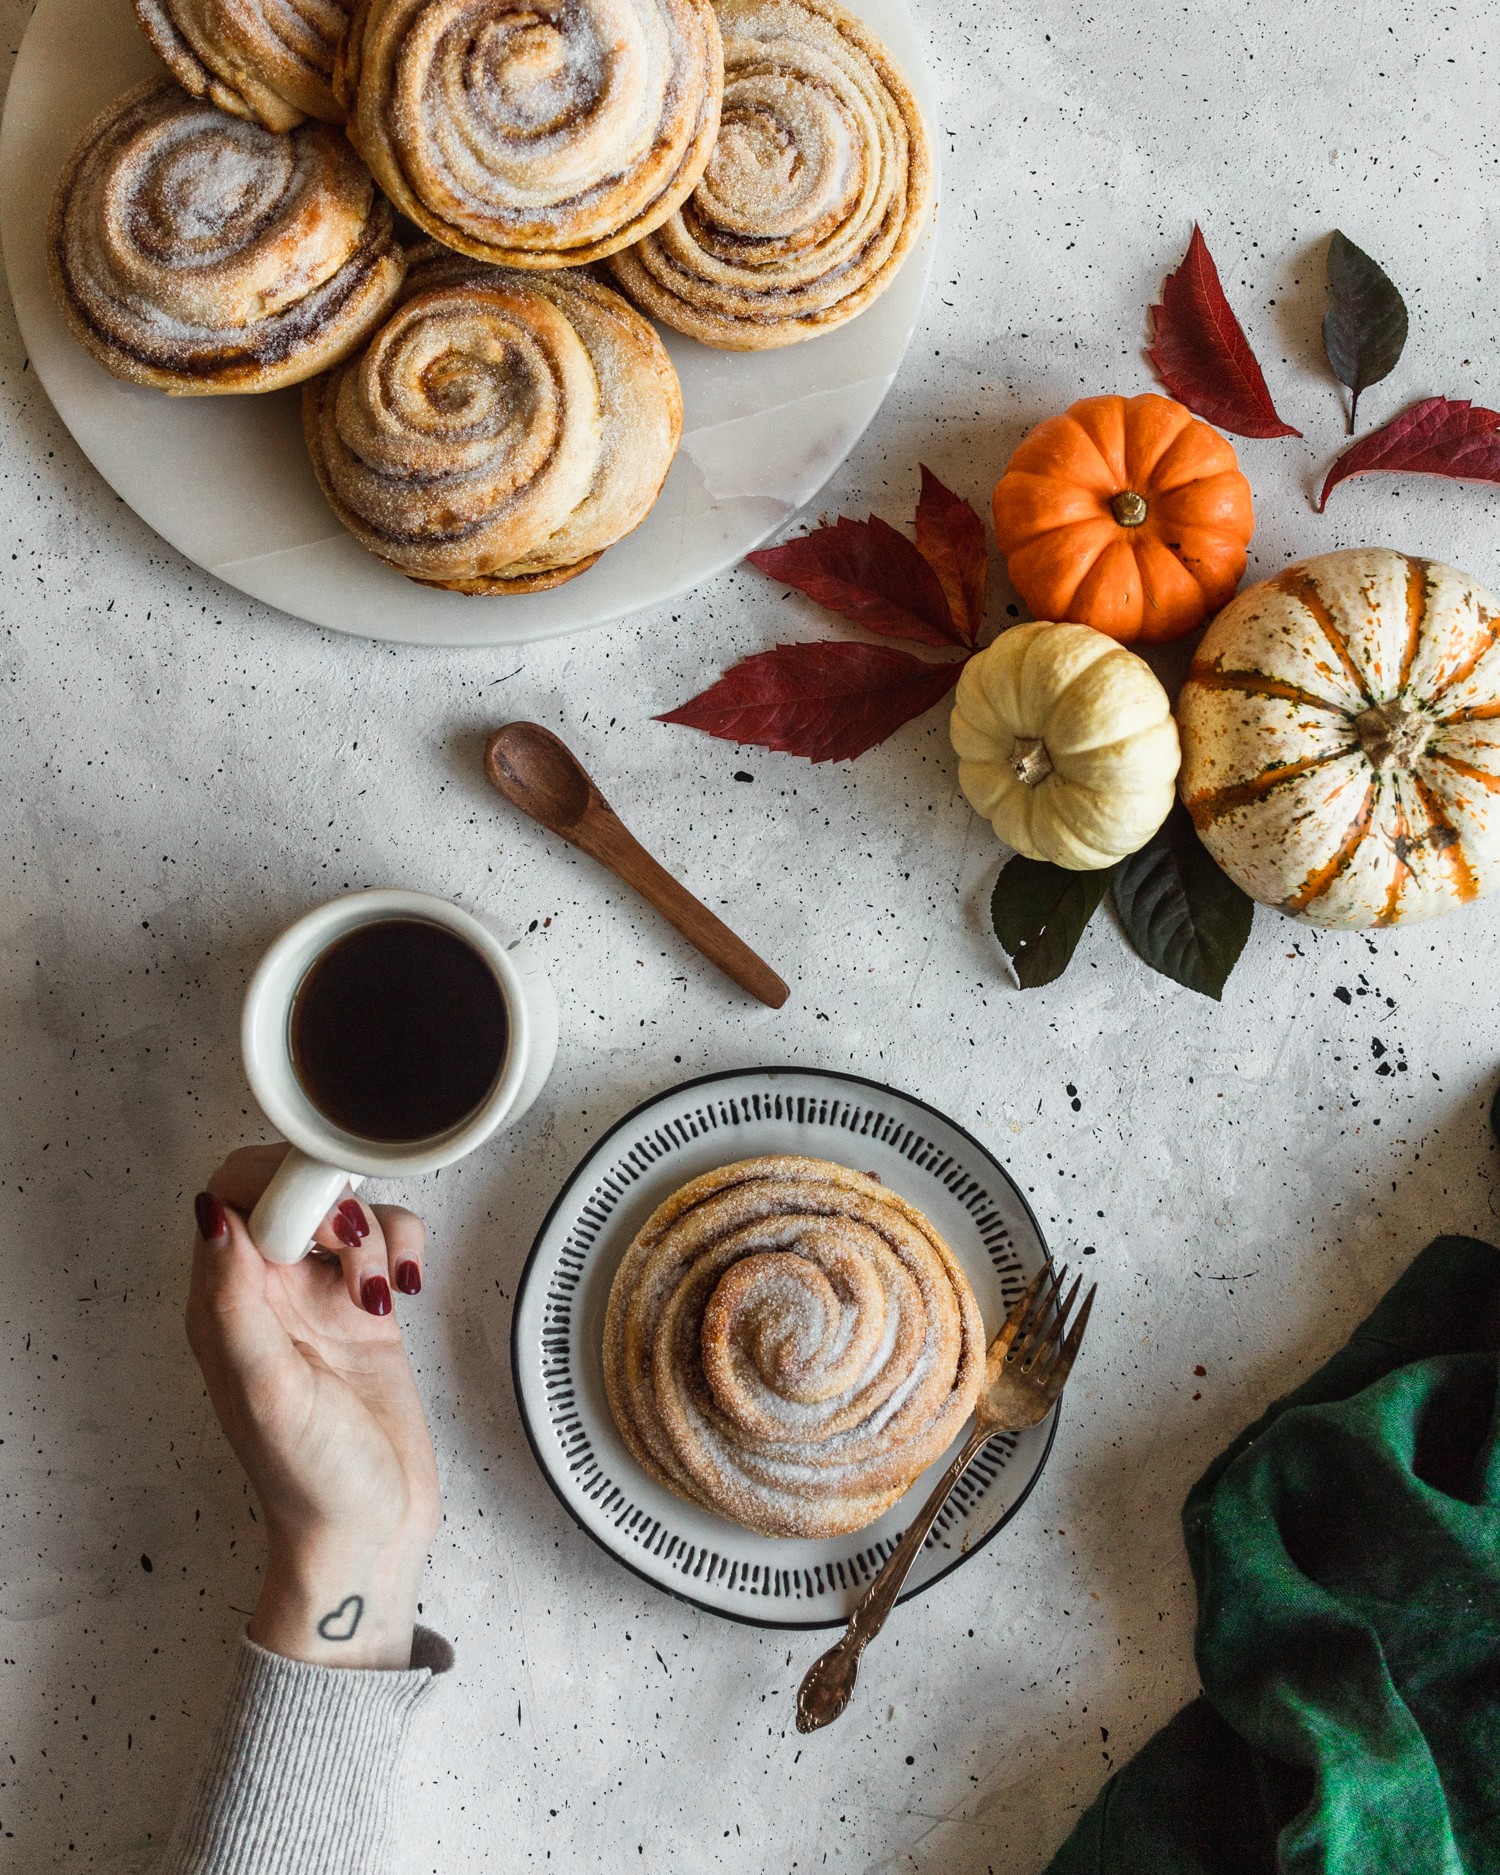 A bird's eye view photo of a pumpkin morning bun on a black and white plate surrounded by a green napkin, pumpkins, and a woman's hand holding a cup of coffee.